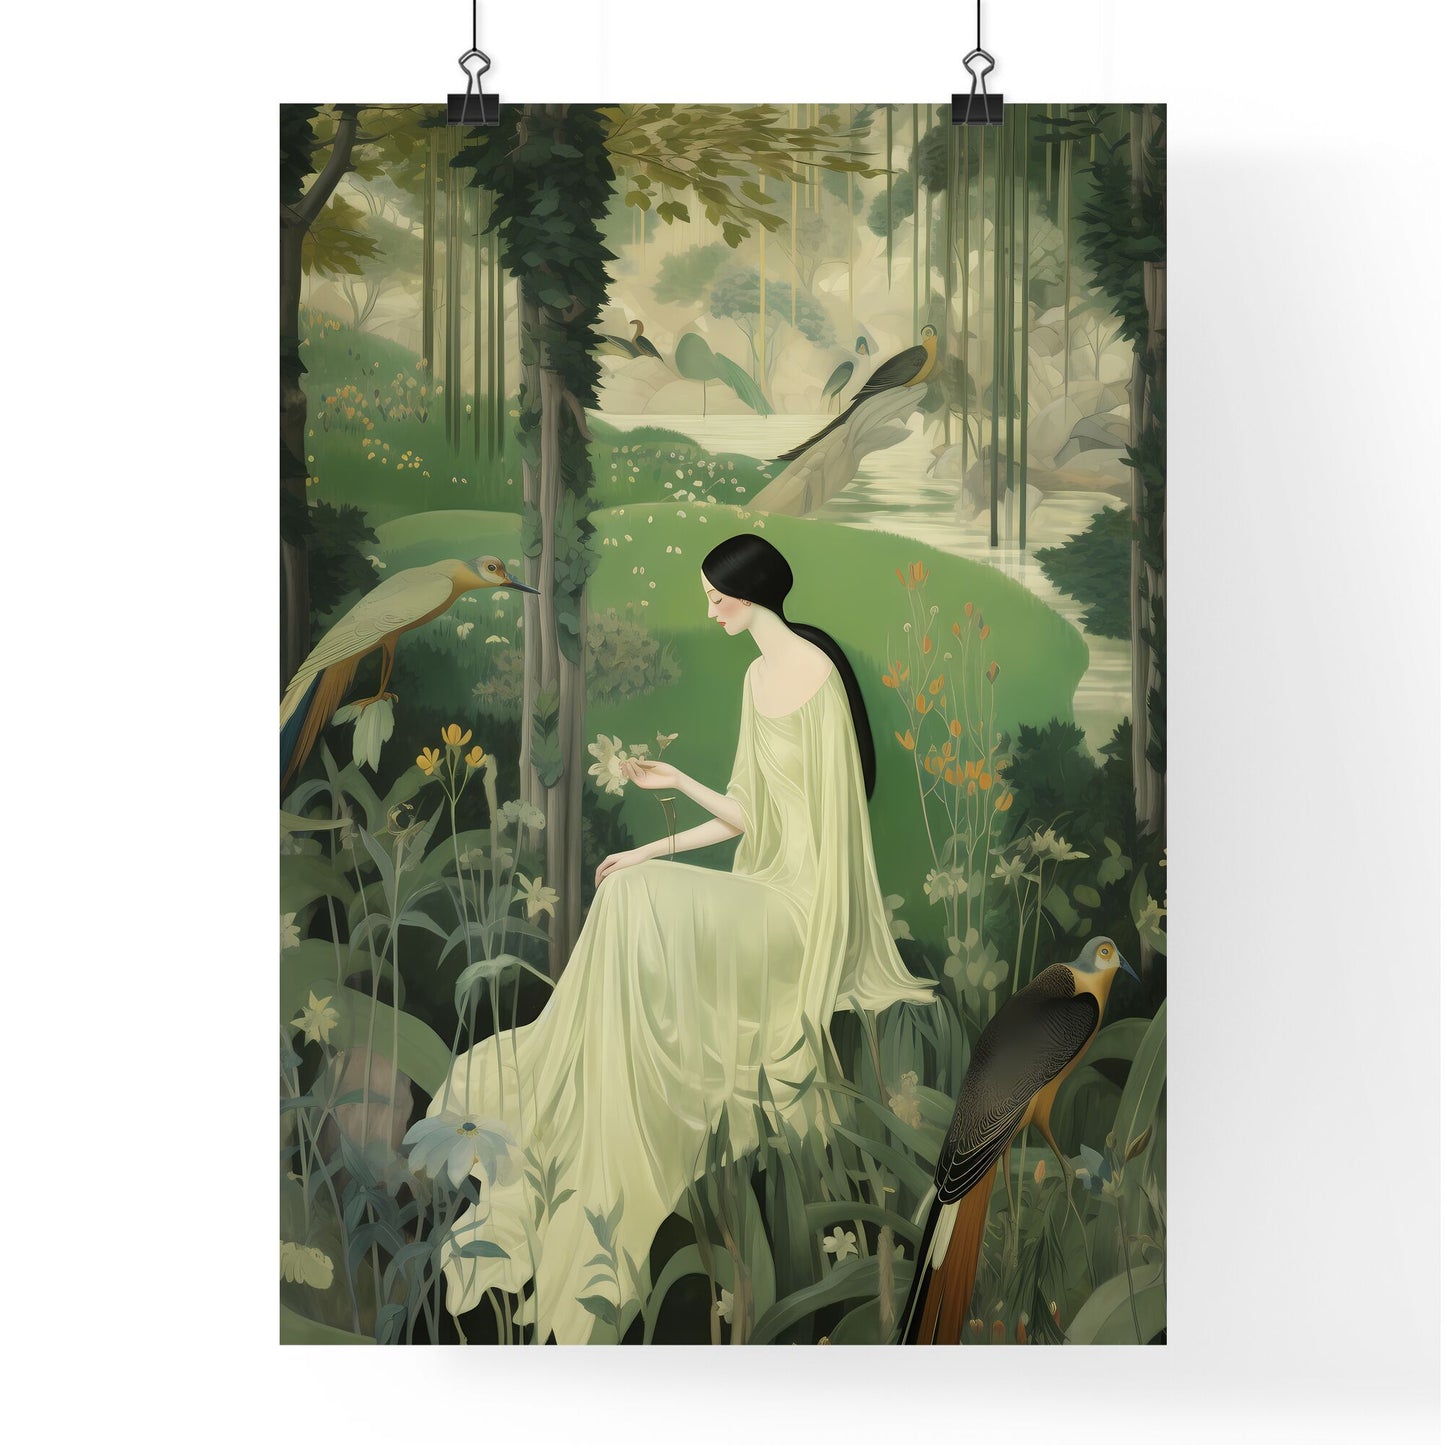 A Poster of the large tapestry and its green colors - A Woman In A White Dress Sitting In A Forest With Birds Default Title